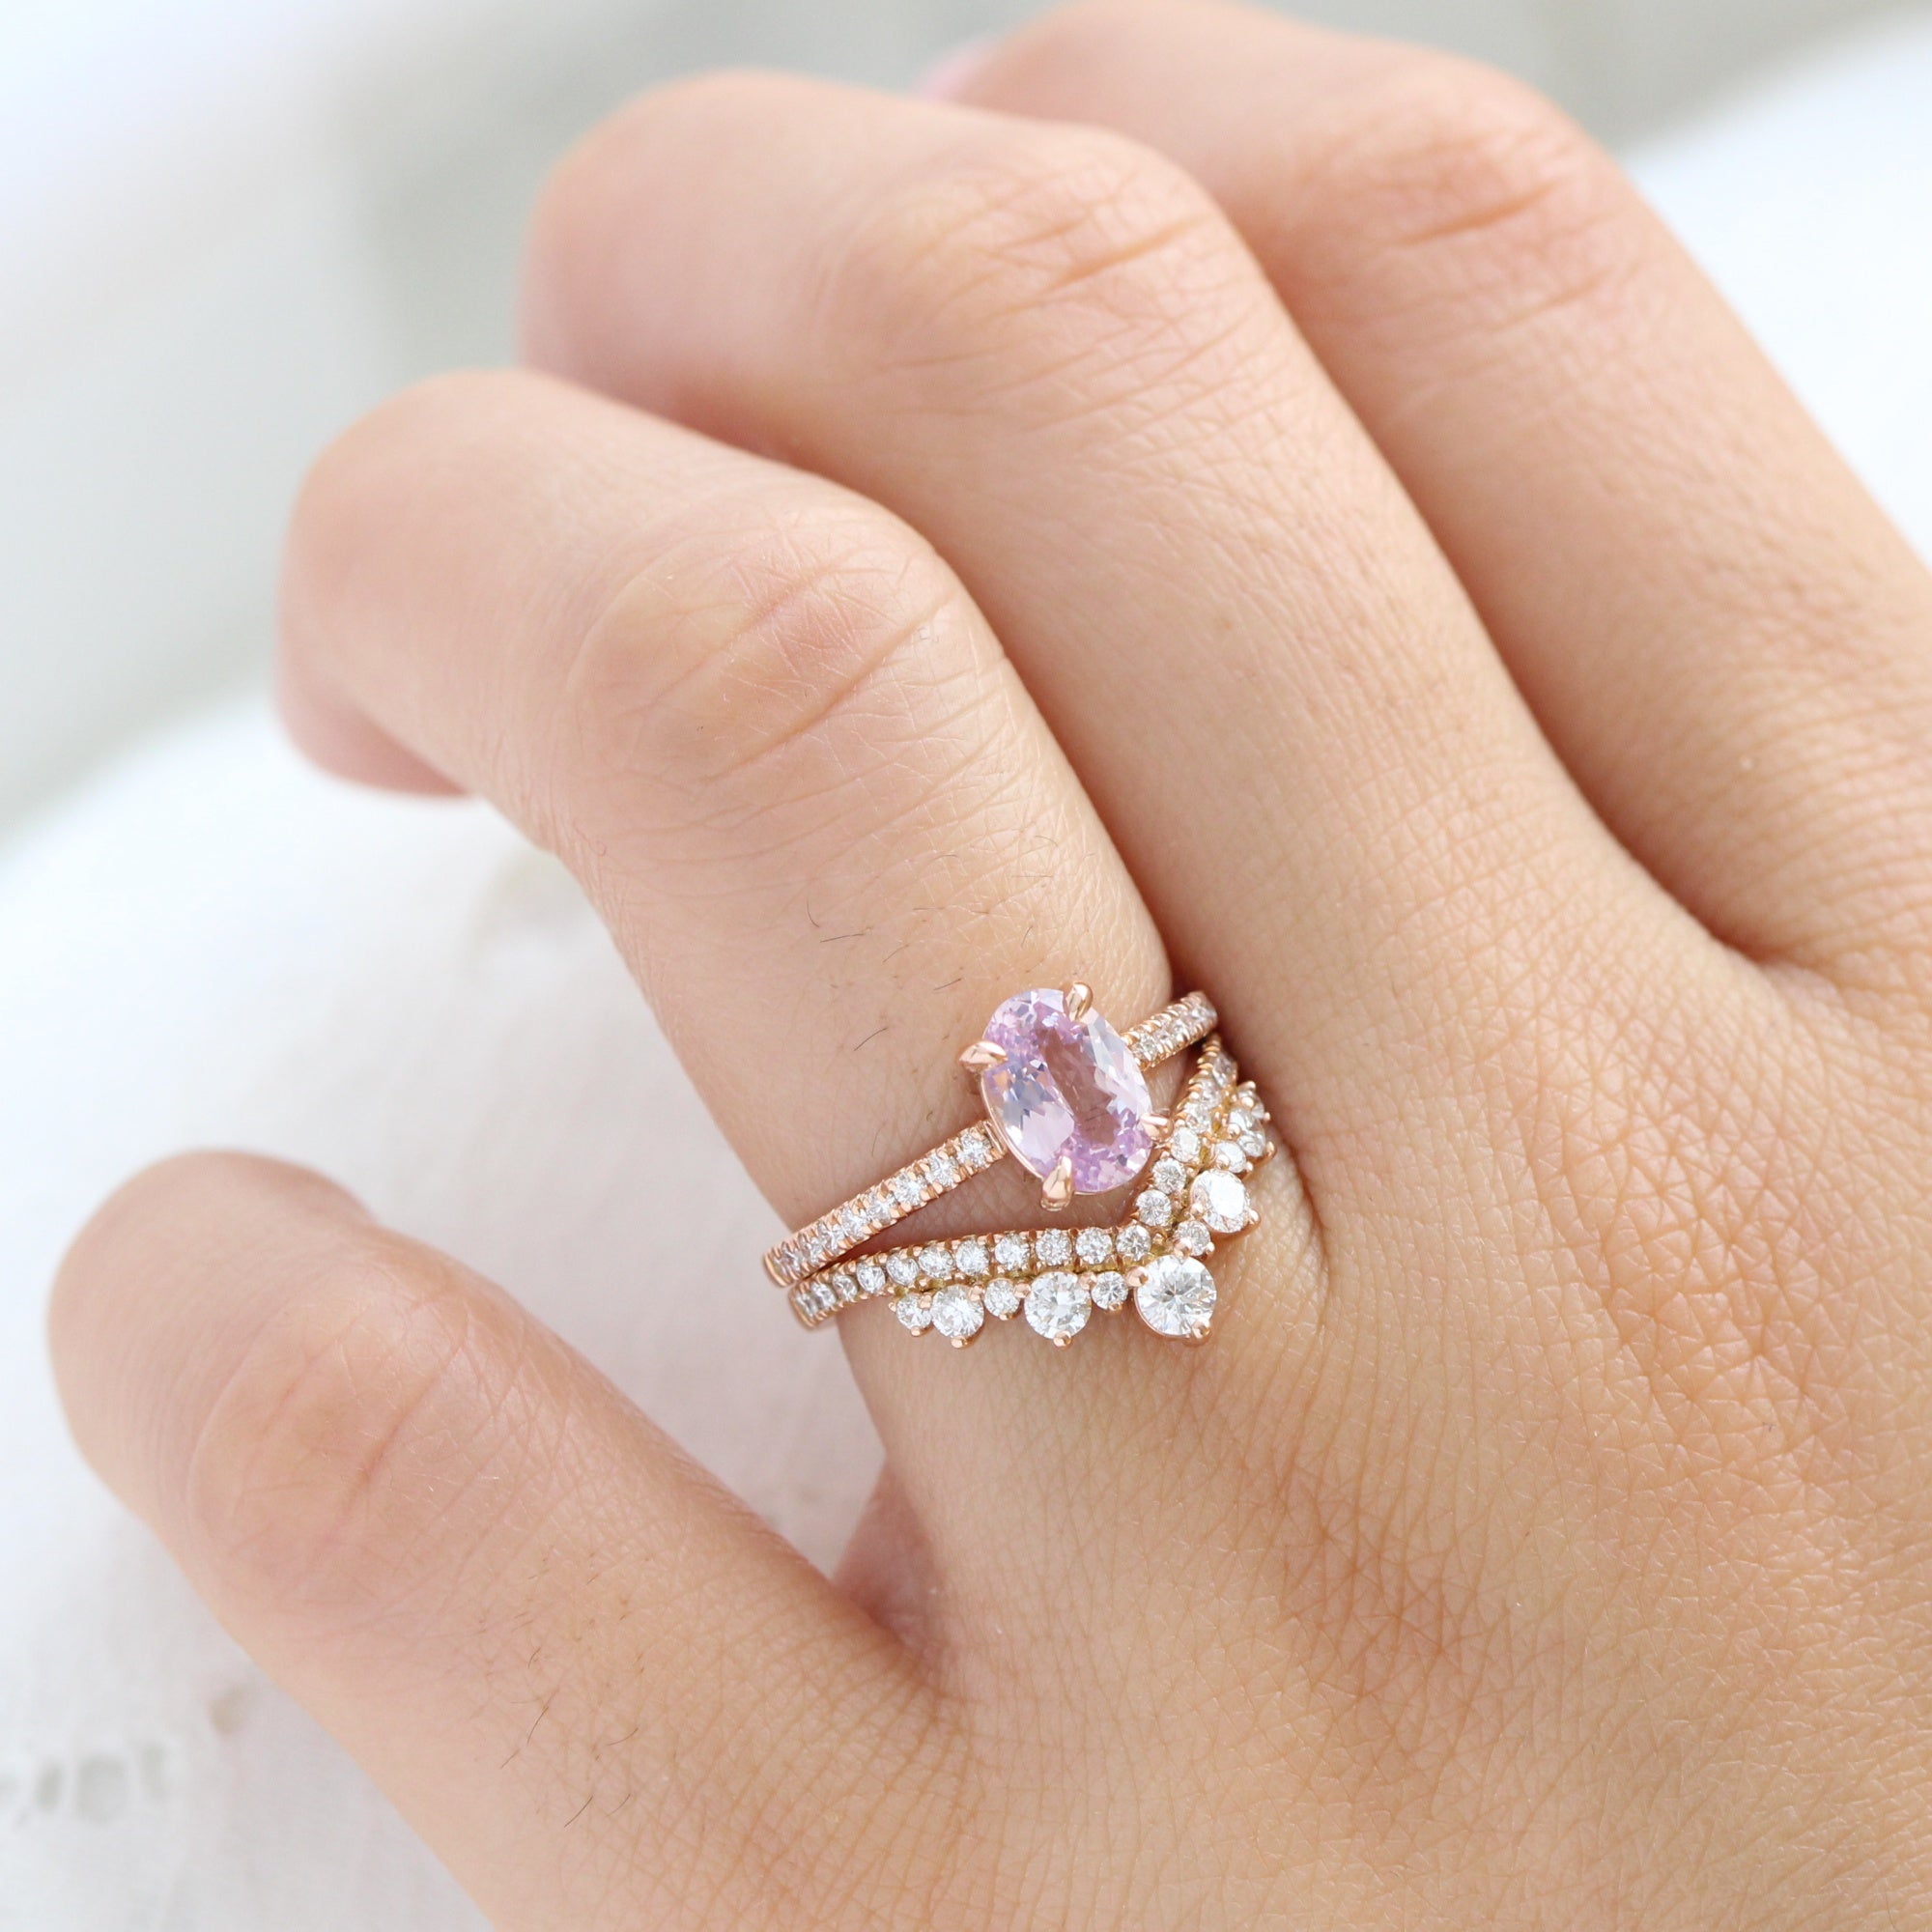 Dreamy lavender sapphire ring rose gold pave diamond band low set engagement ring la more design jewelry